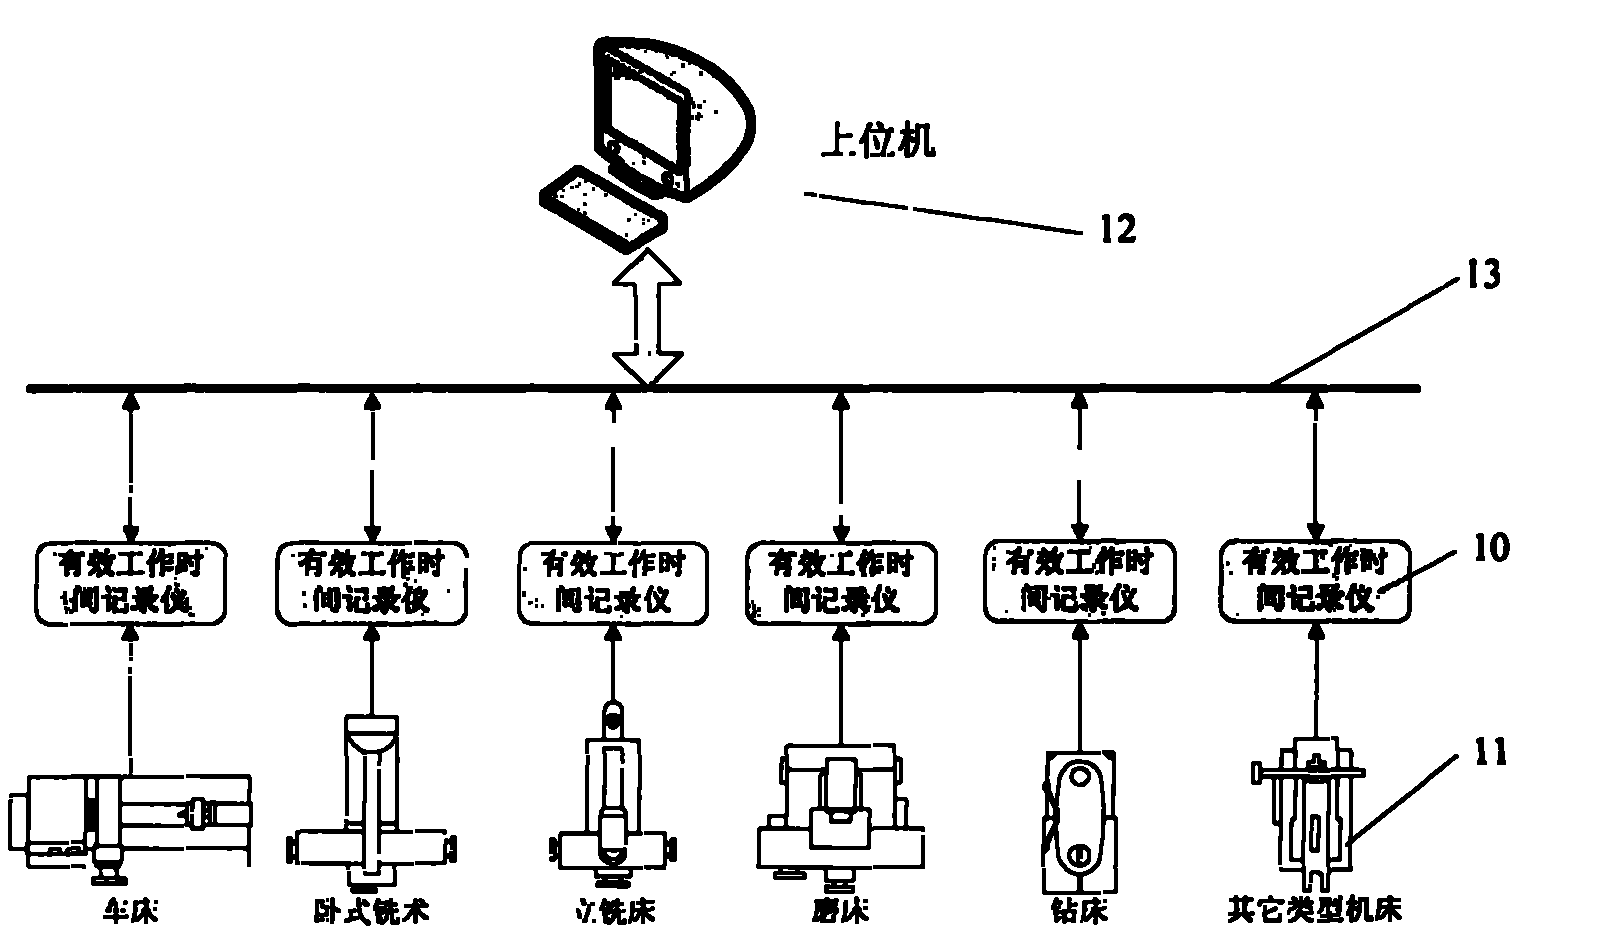 Operational use time recorder of general machine tool